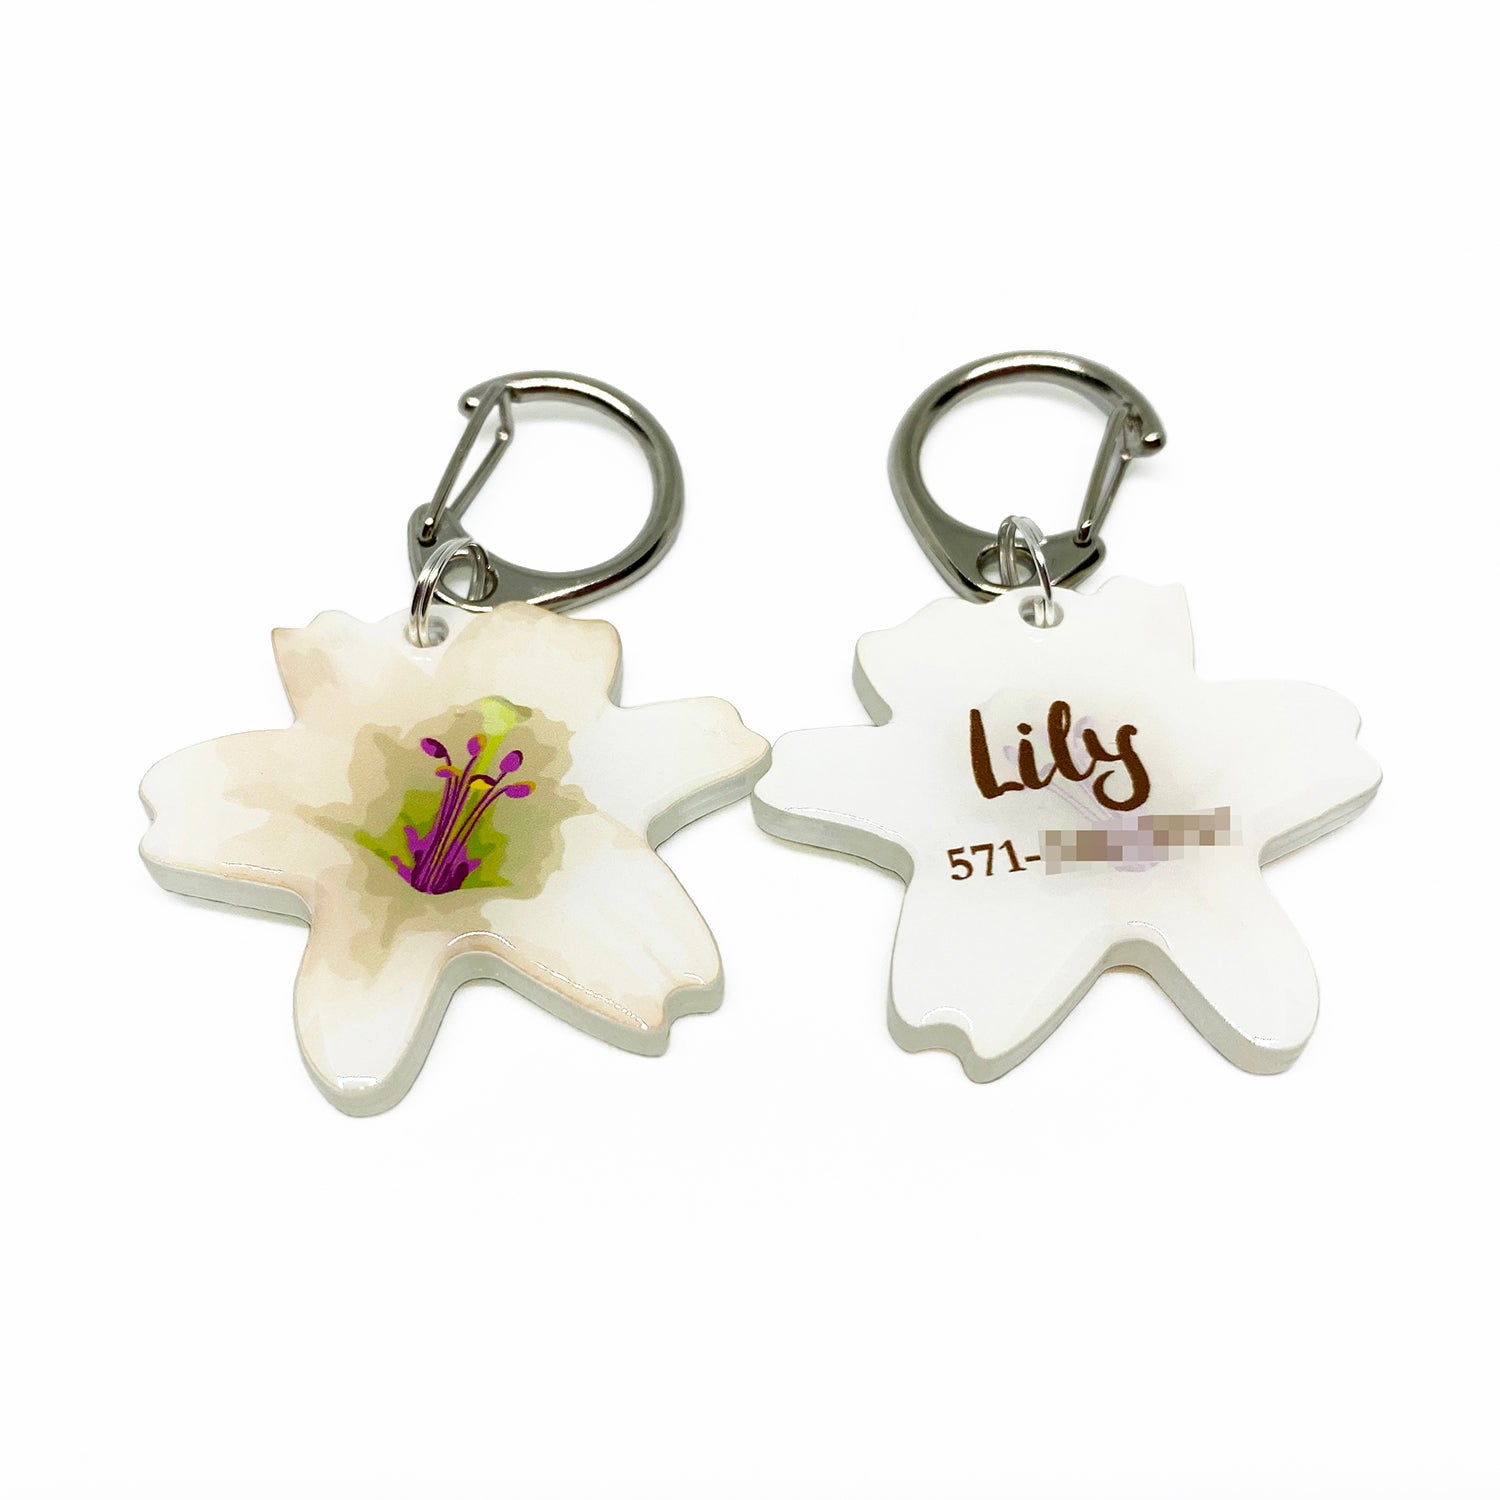 Linen Lily - 2x Tags Dog Name Tags by Bashtags